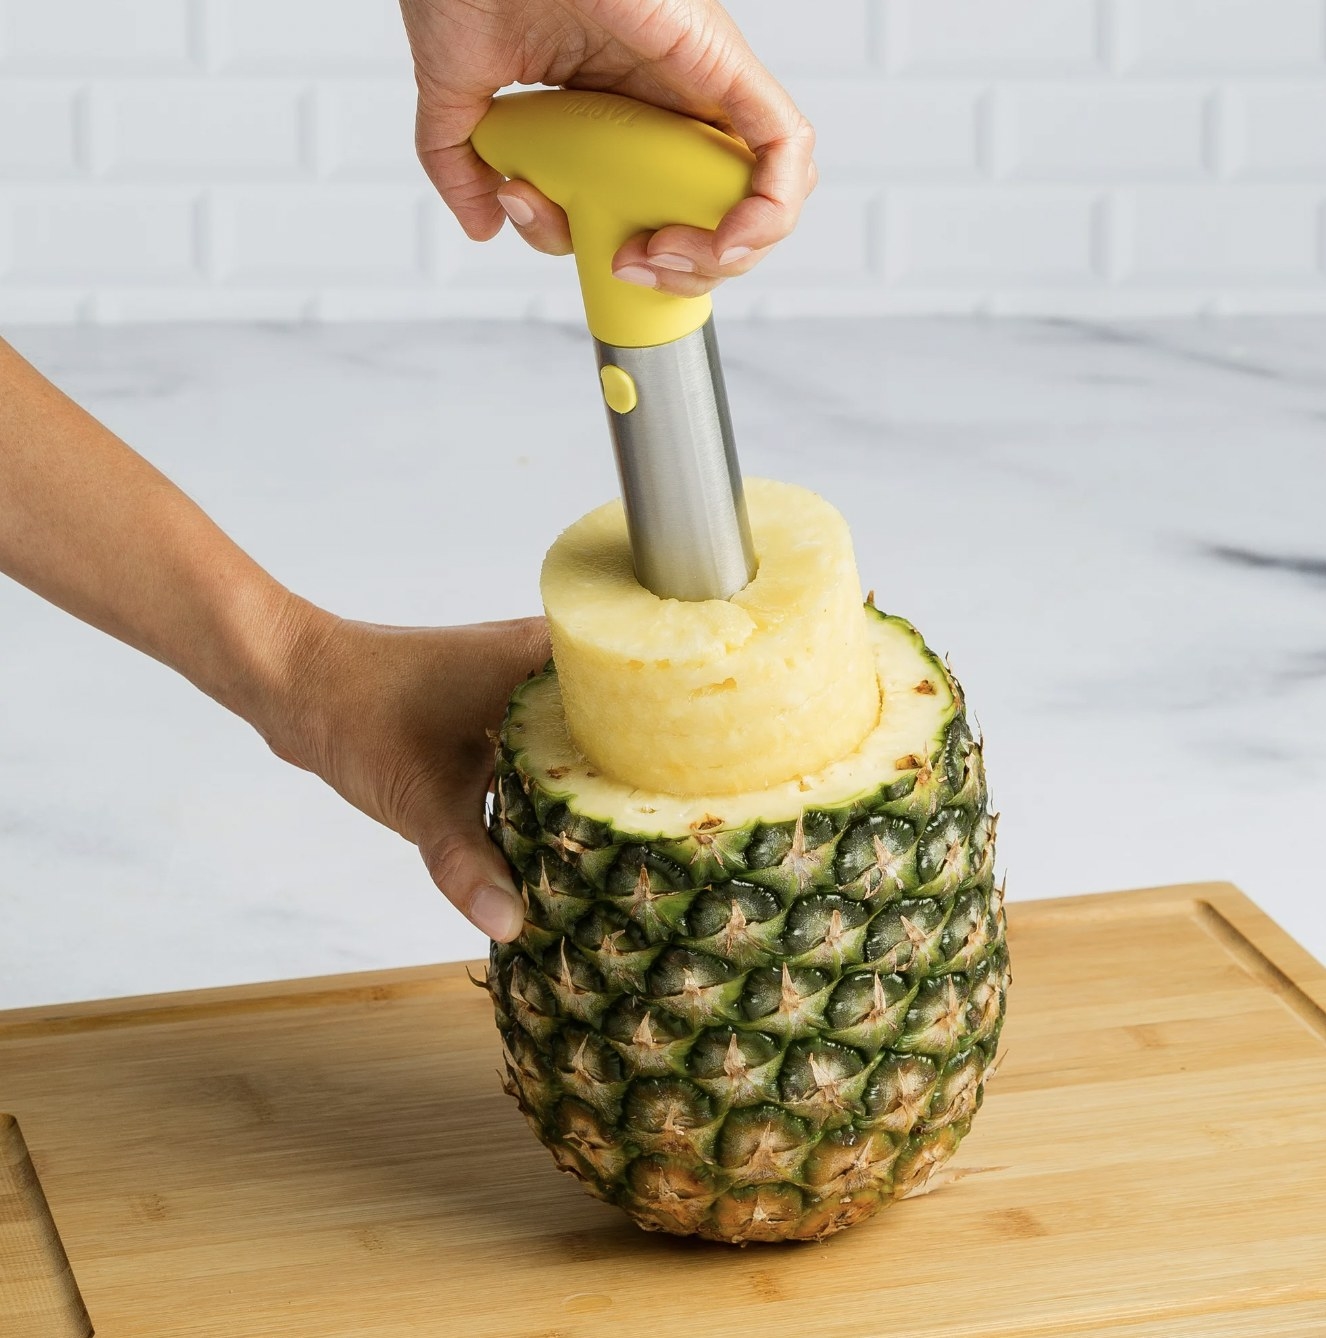 The pineapple corer pulling out circular chunk of pineapple